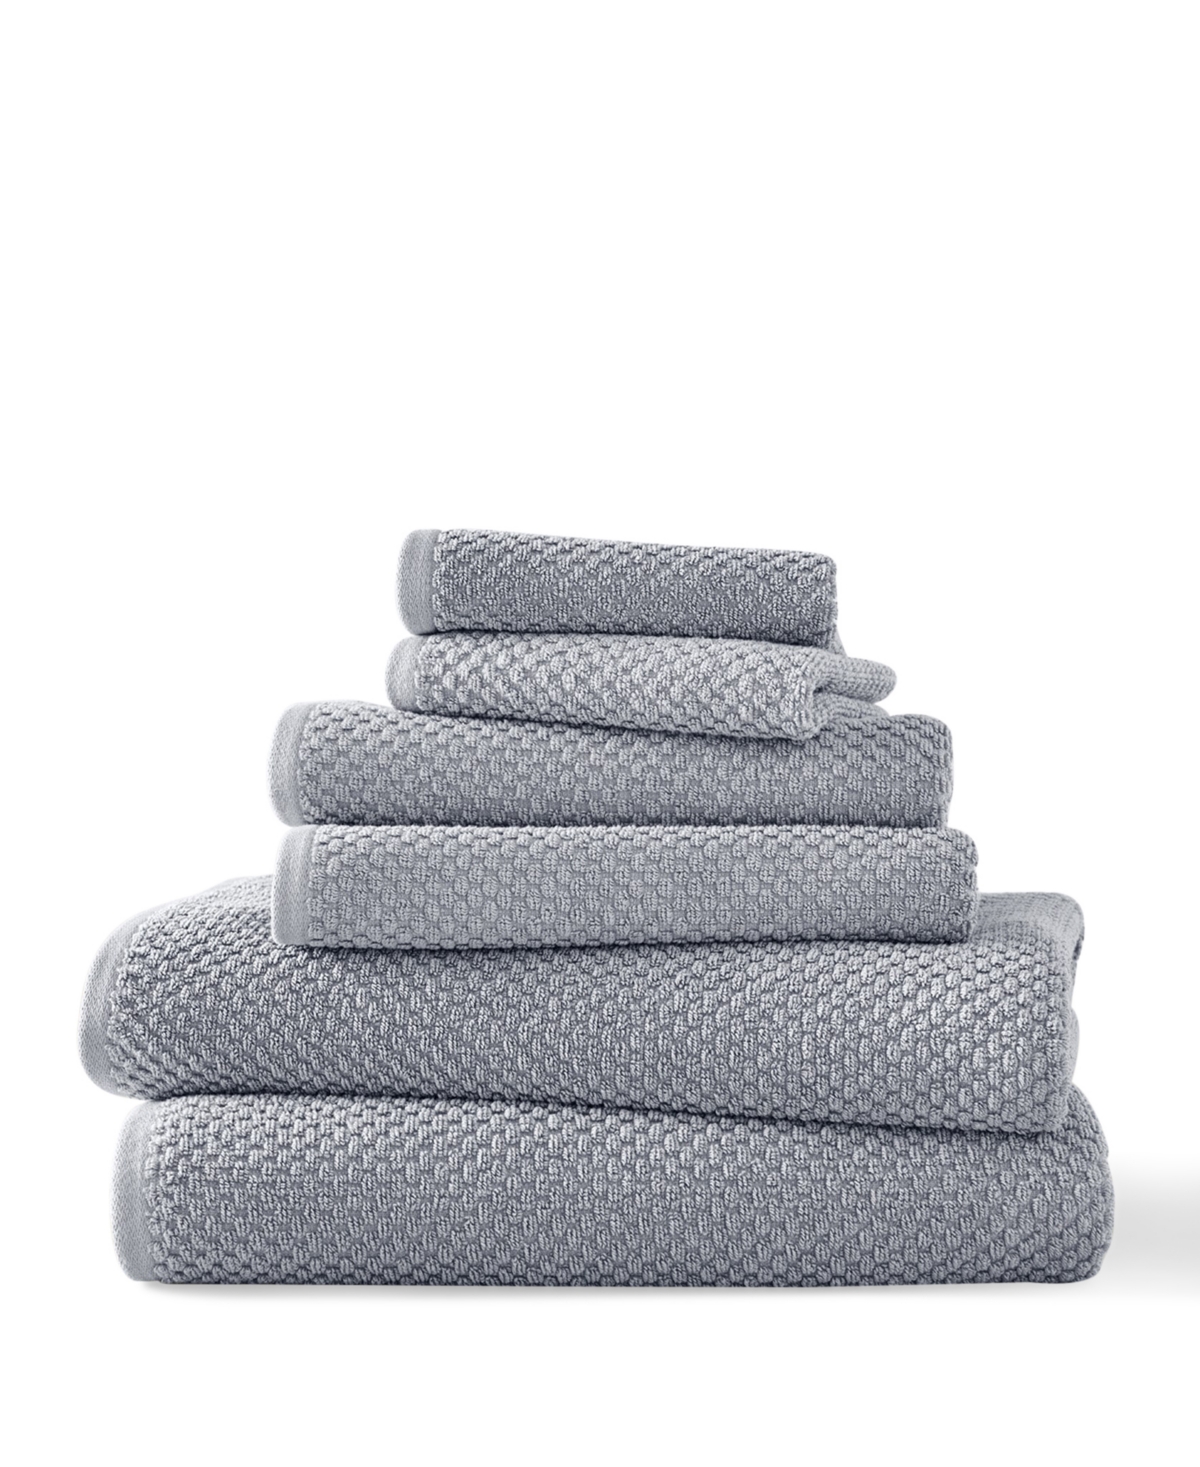 Blue Loom Lilly Cotton And Rayon From Bamboo 6 Piece Towel Set Bedding In Mineral Blue